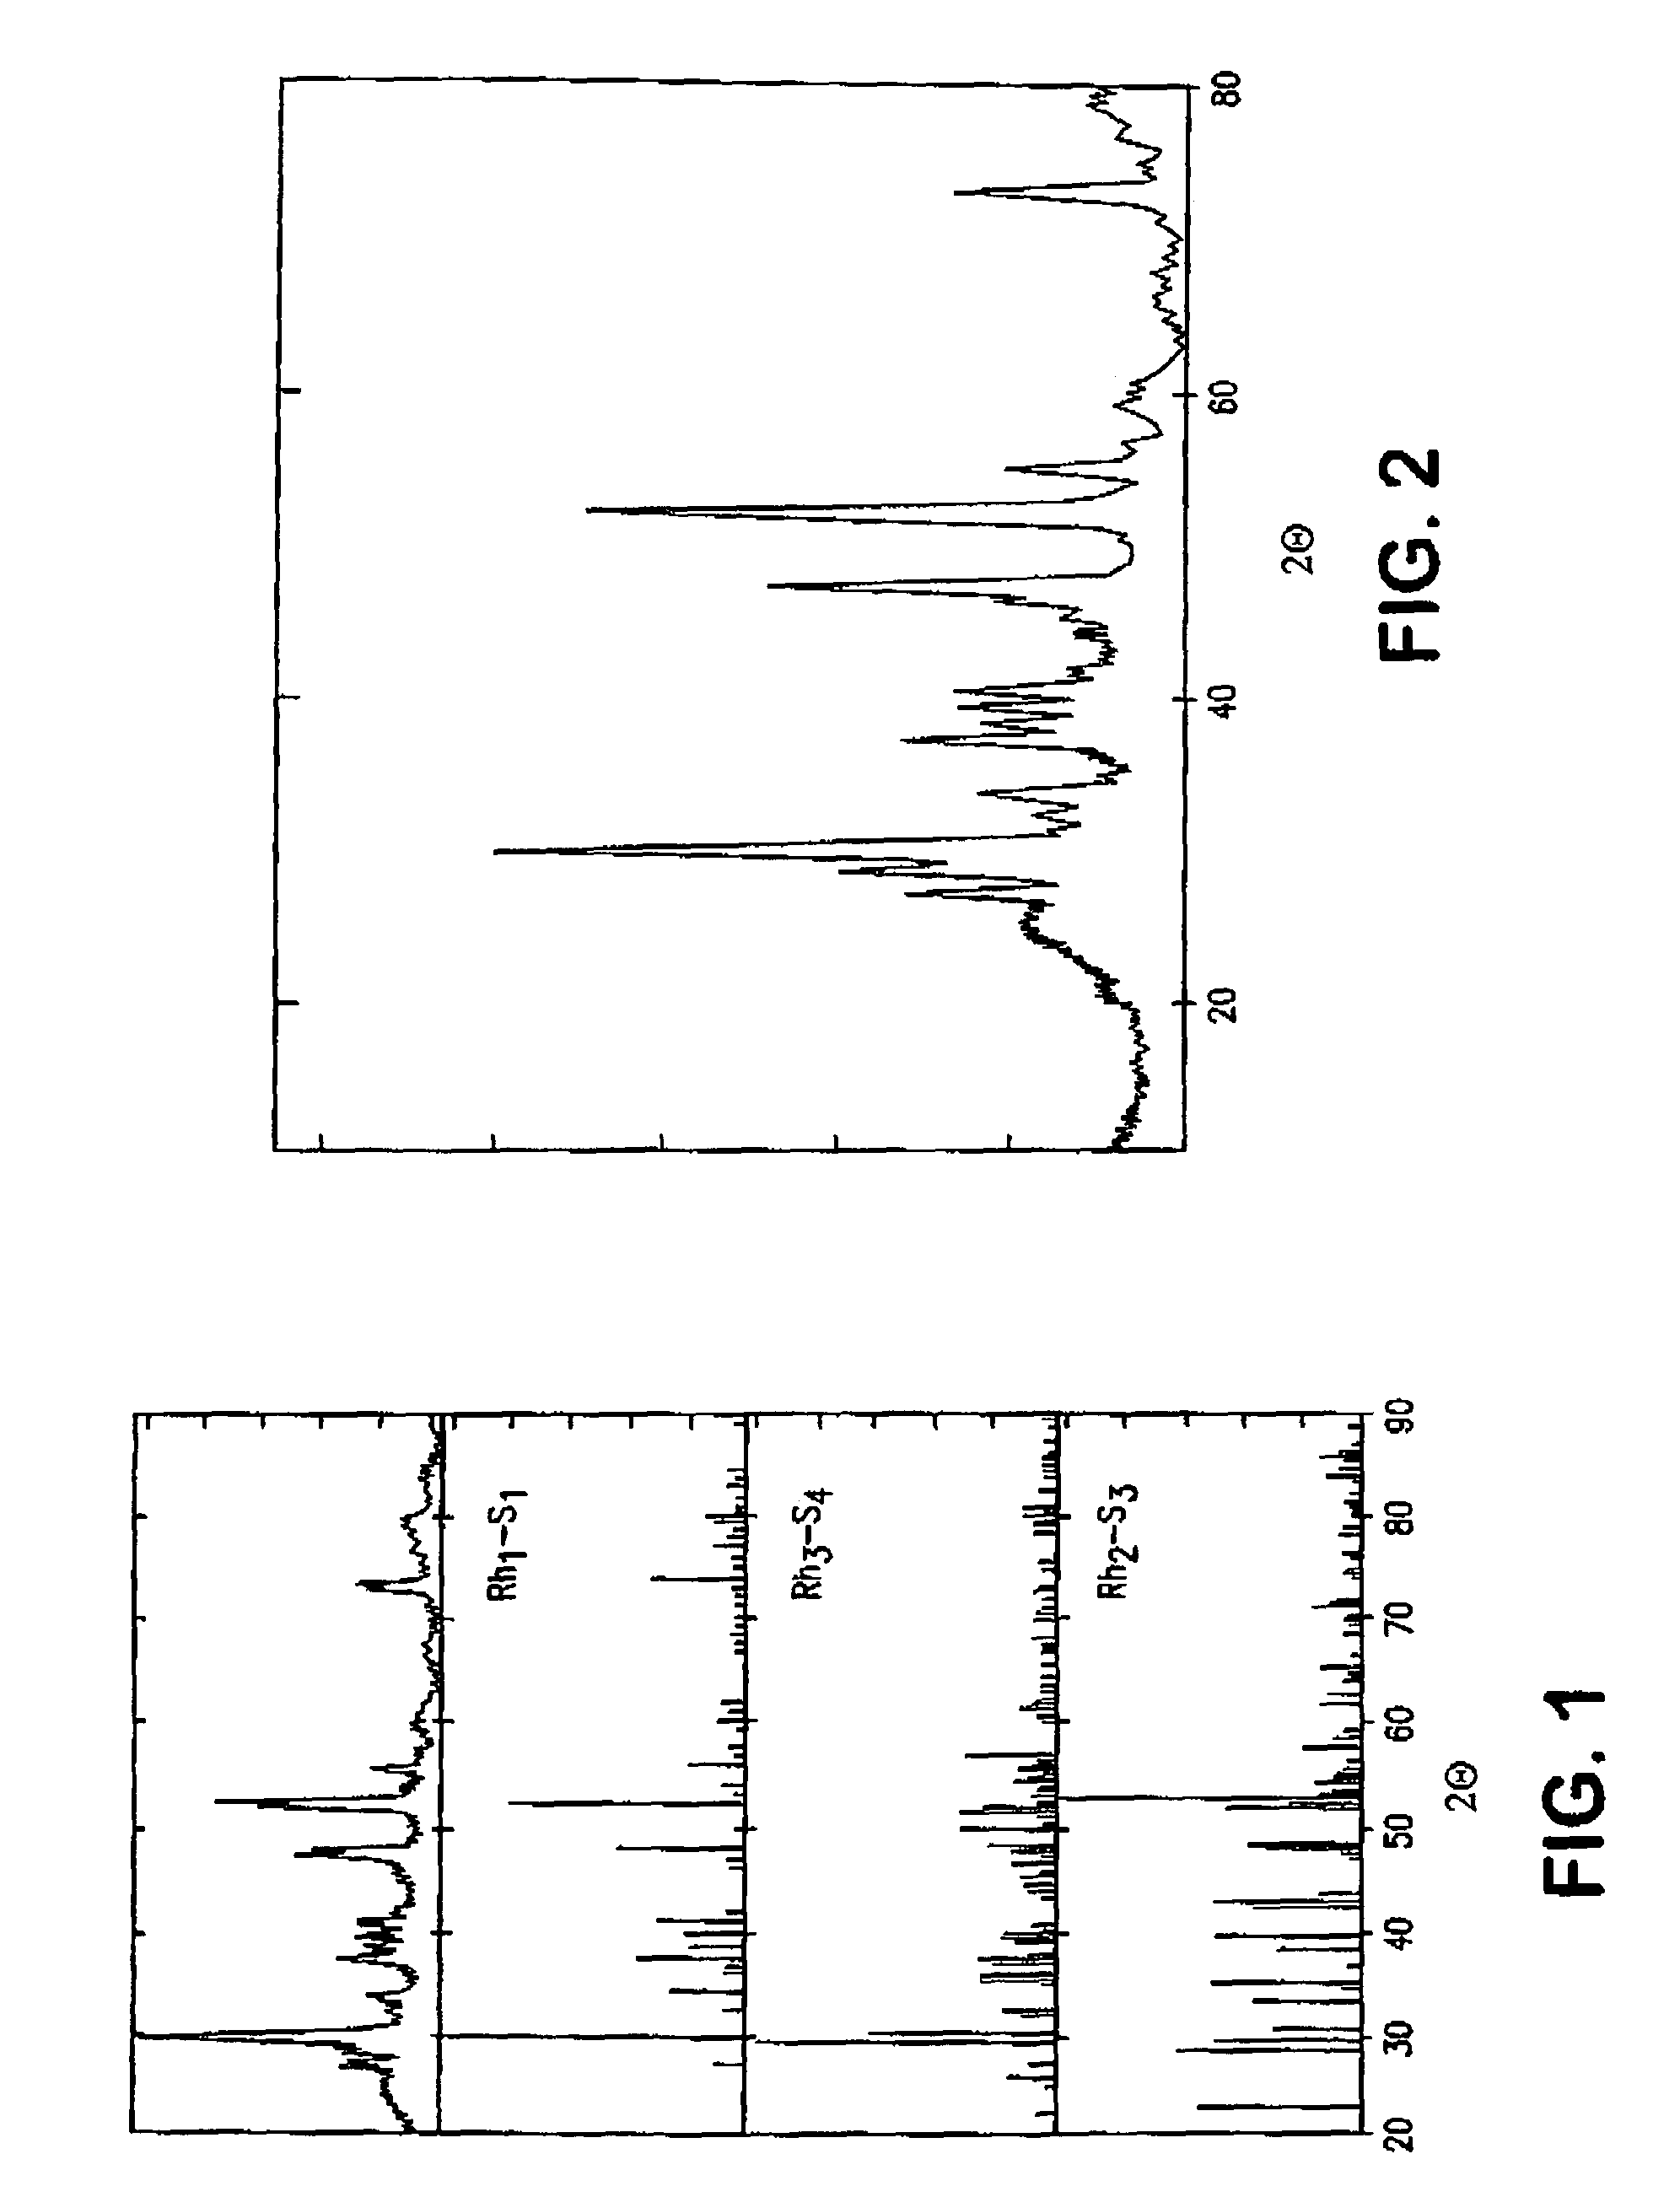 Catalyst for electrochemical reduction of oxygen